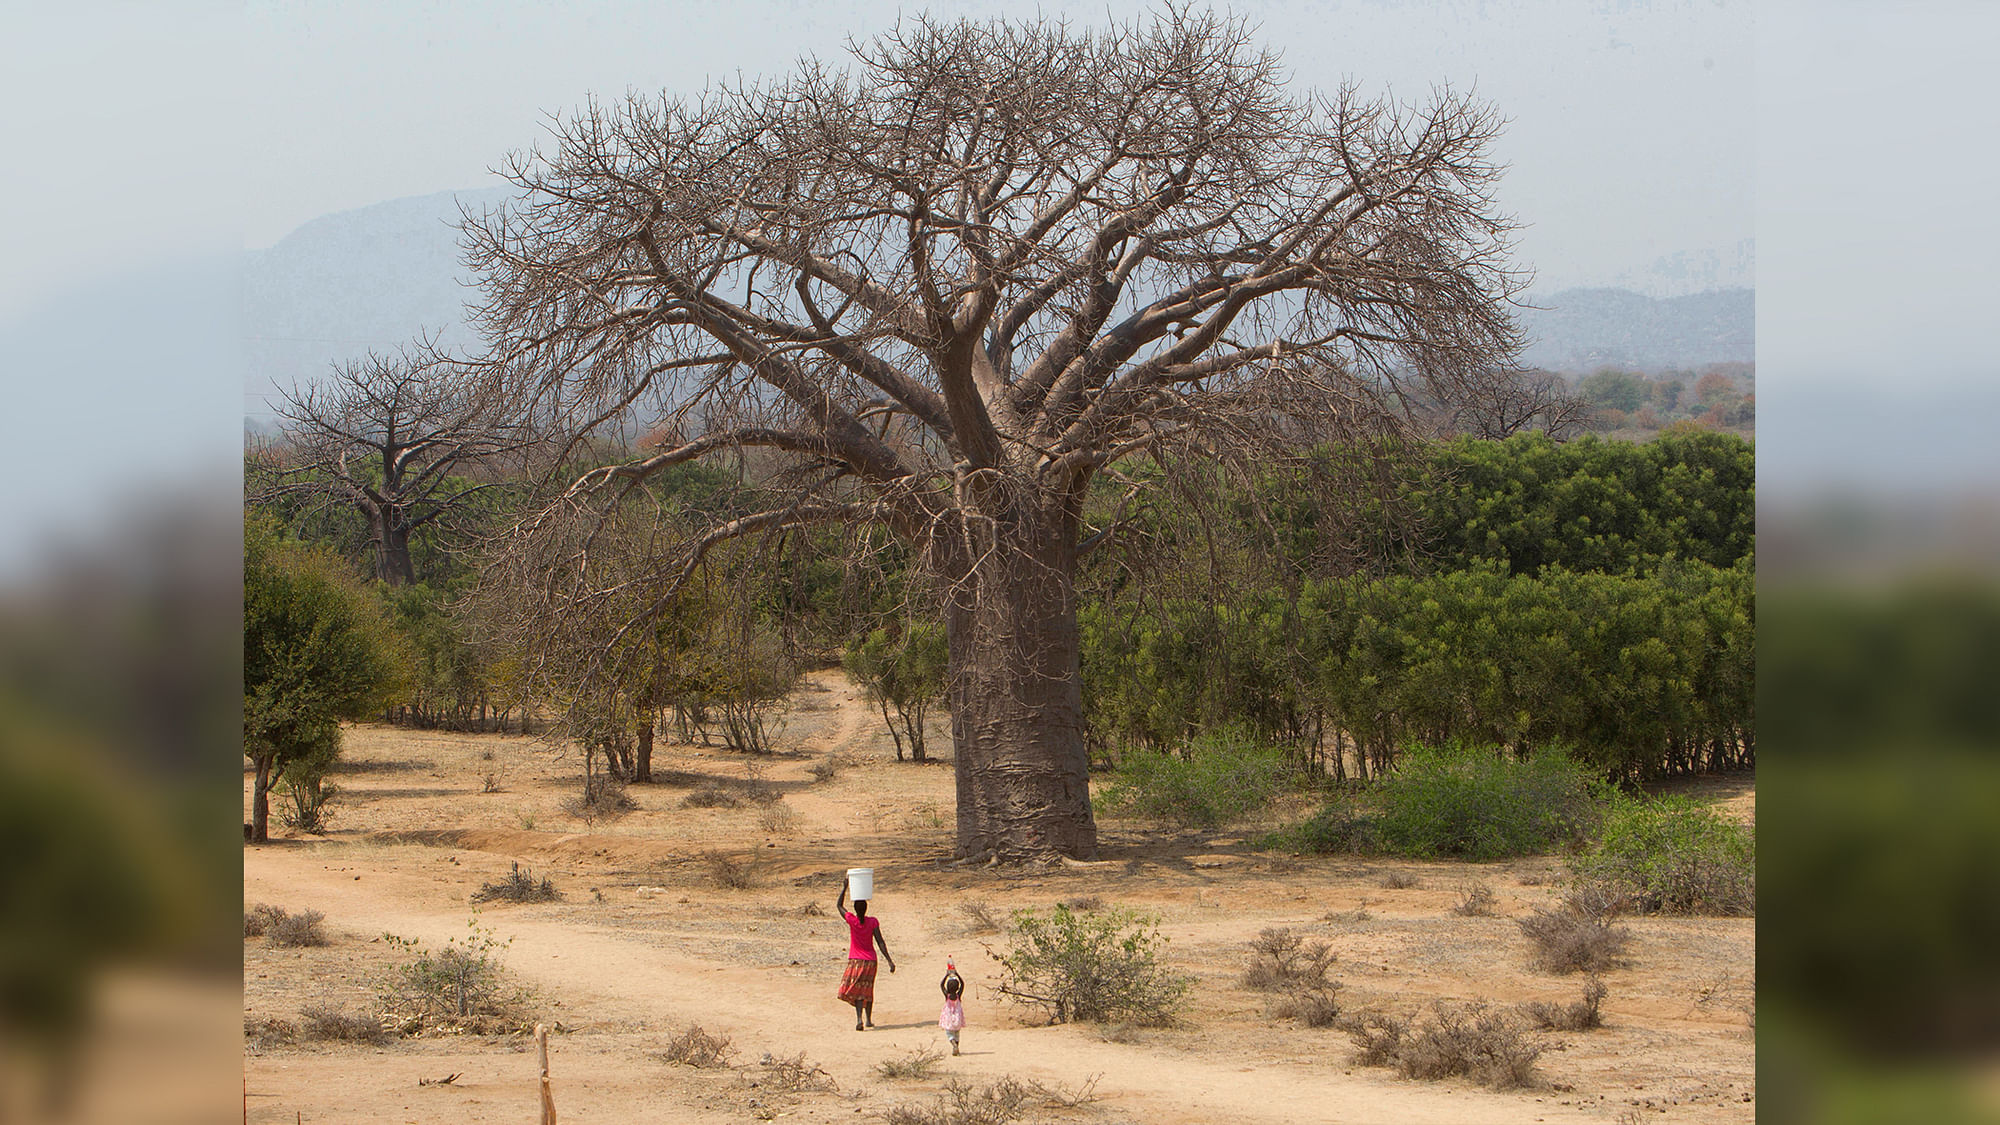 Baobab trees dot southern Africa’s hot and dry stretches of savanna.&nbsp; &nbsp;  &nbsp;